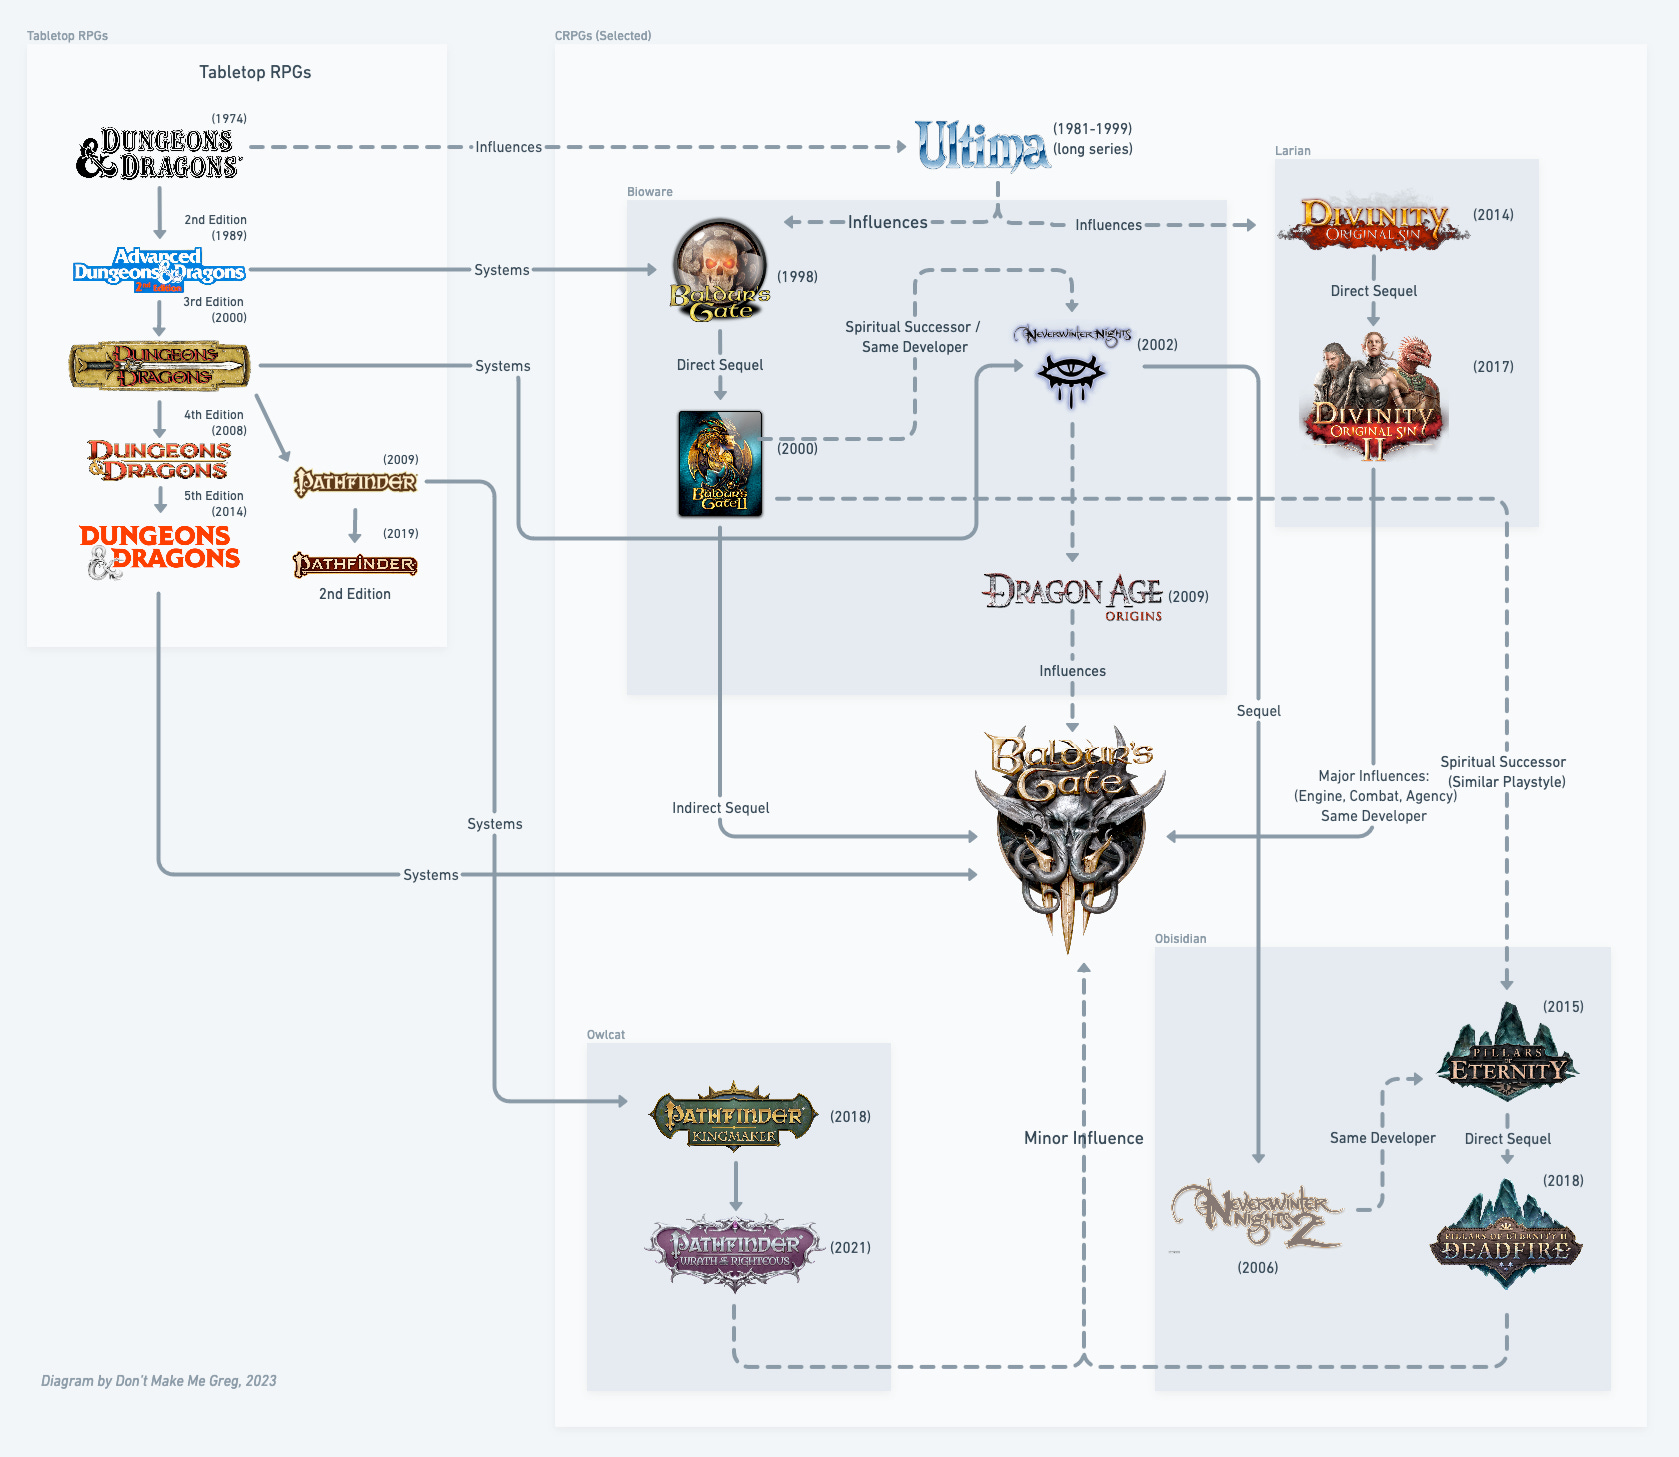 A diagram showing the relationships between tabletop RPGs such as Dungeons and Dragons and Pathfinder and prior CRPGs to Baldur's Gate 3, such as Baldur's Gate, Divinity Original Sin, Neverinter Nights, Dragon Age: Origins, Pillars of Eternity, and Pathfinder: Wrath of the Righteous. Many CRPGs influenced Baldur's Gate 3. The Divinity: Original Sin series is also developed by the same studio as the developer of Baldur's Gate 3.